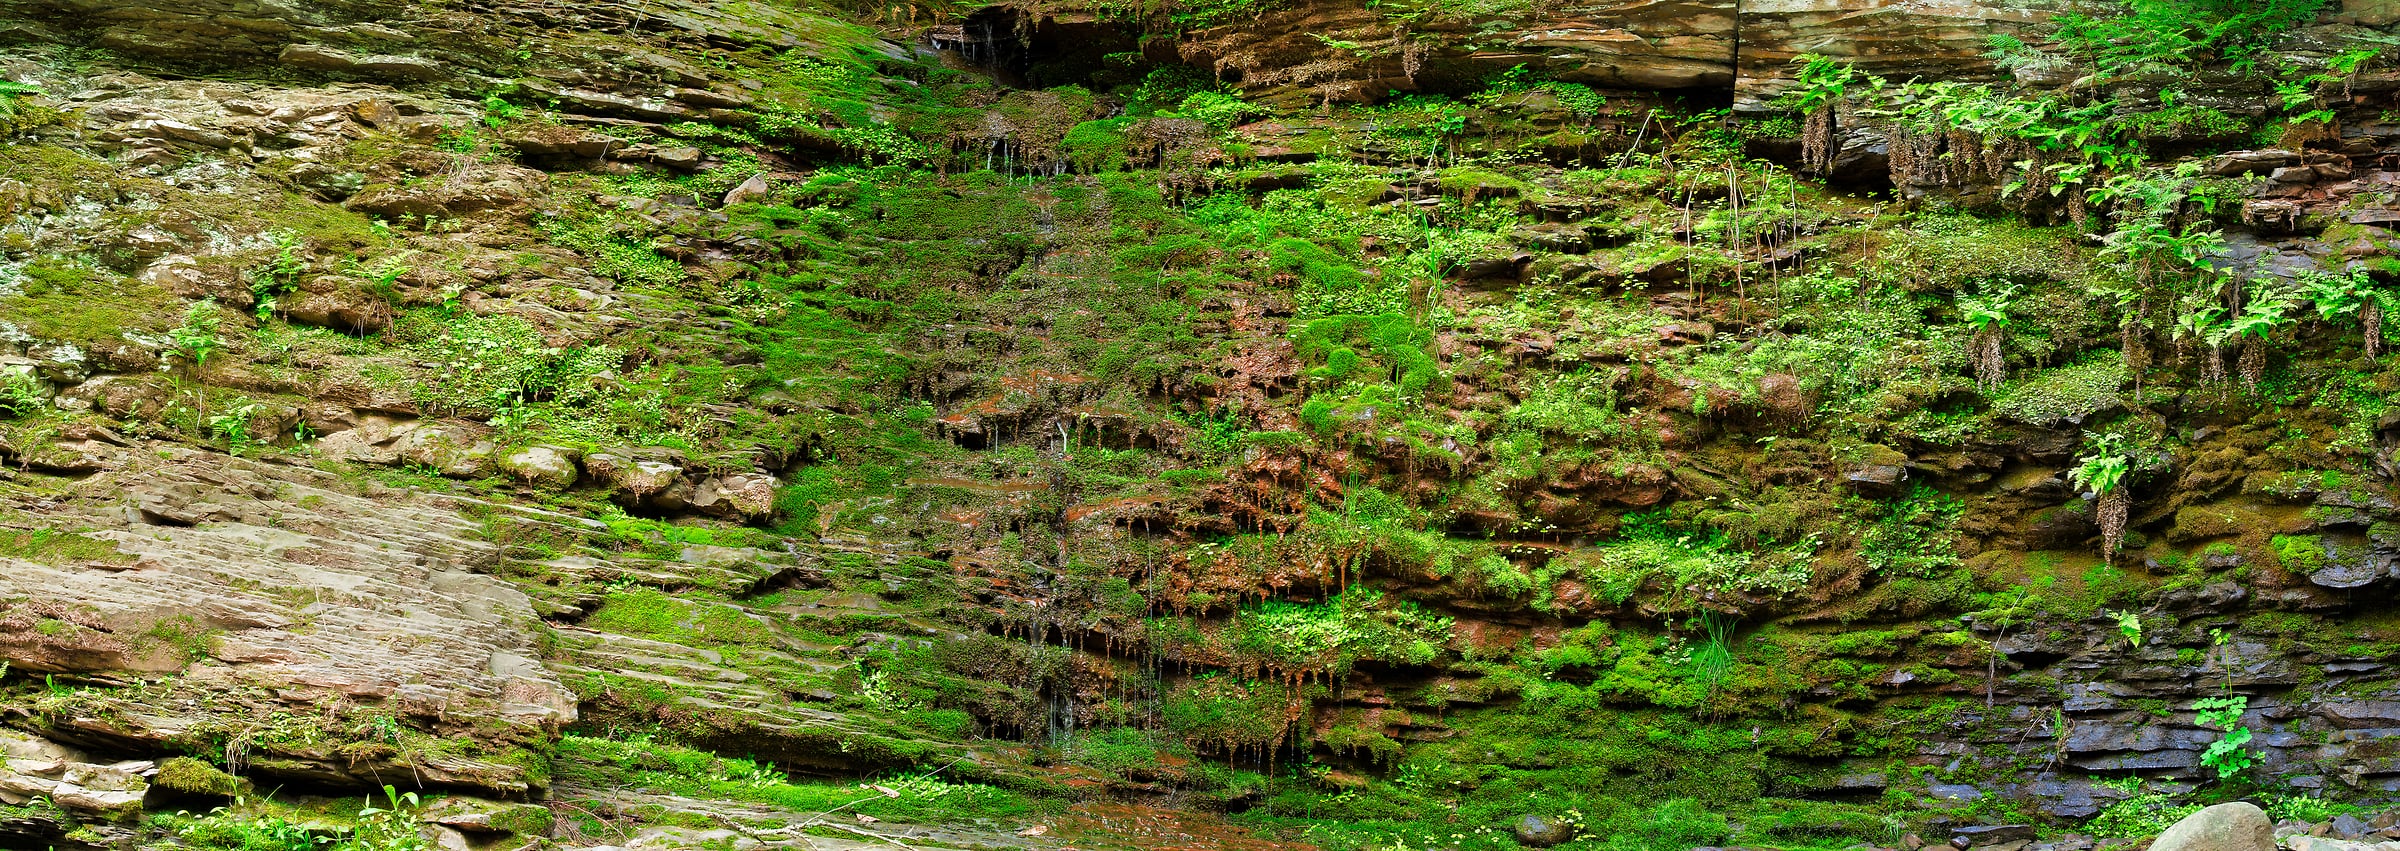 276 megapixels! A very high resolution, large-format VAST photo print of moss on a rock wall with some water running down it; nature photograph created by David David in Porcupine Mountains Wilderness State Park, Michigan.